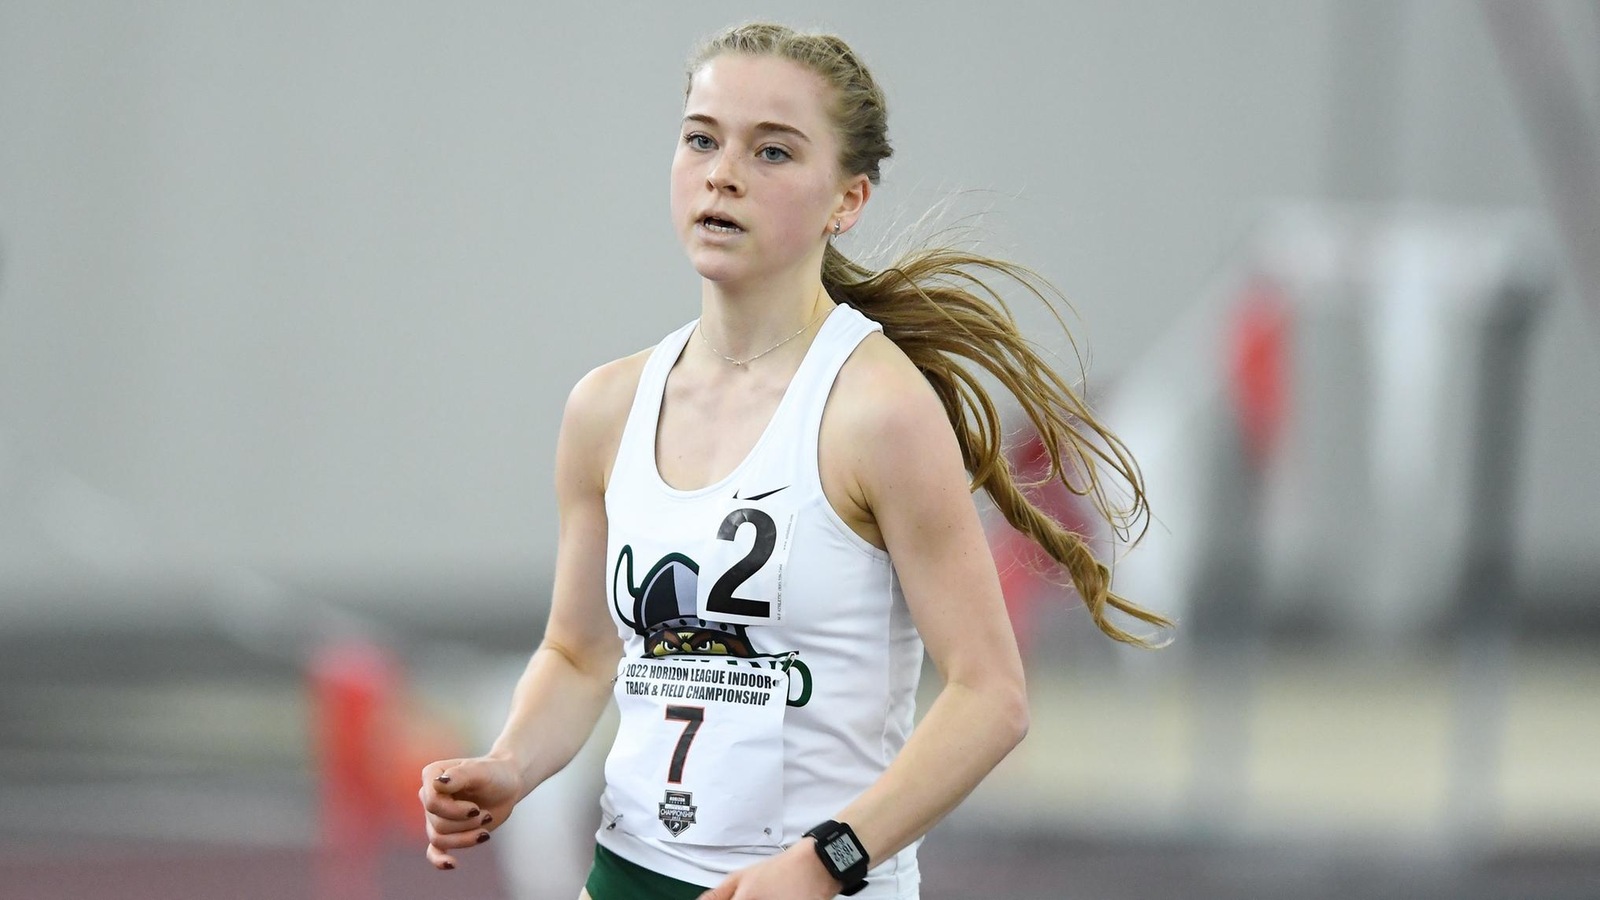 Cleveland State Track & Field Competes At Cedarville Invitational